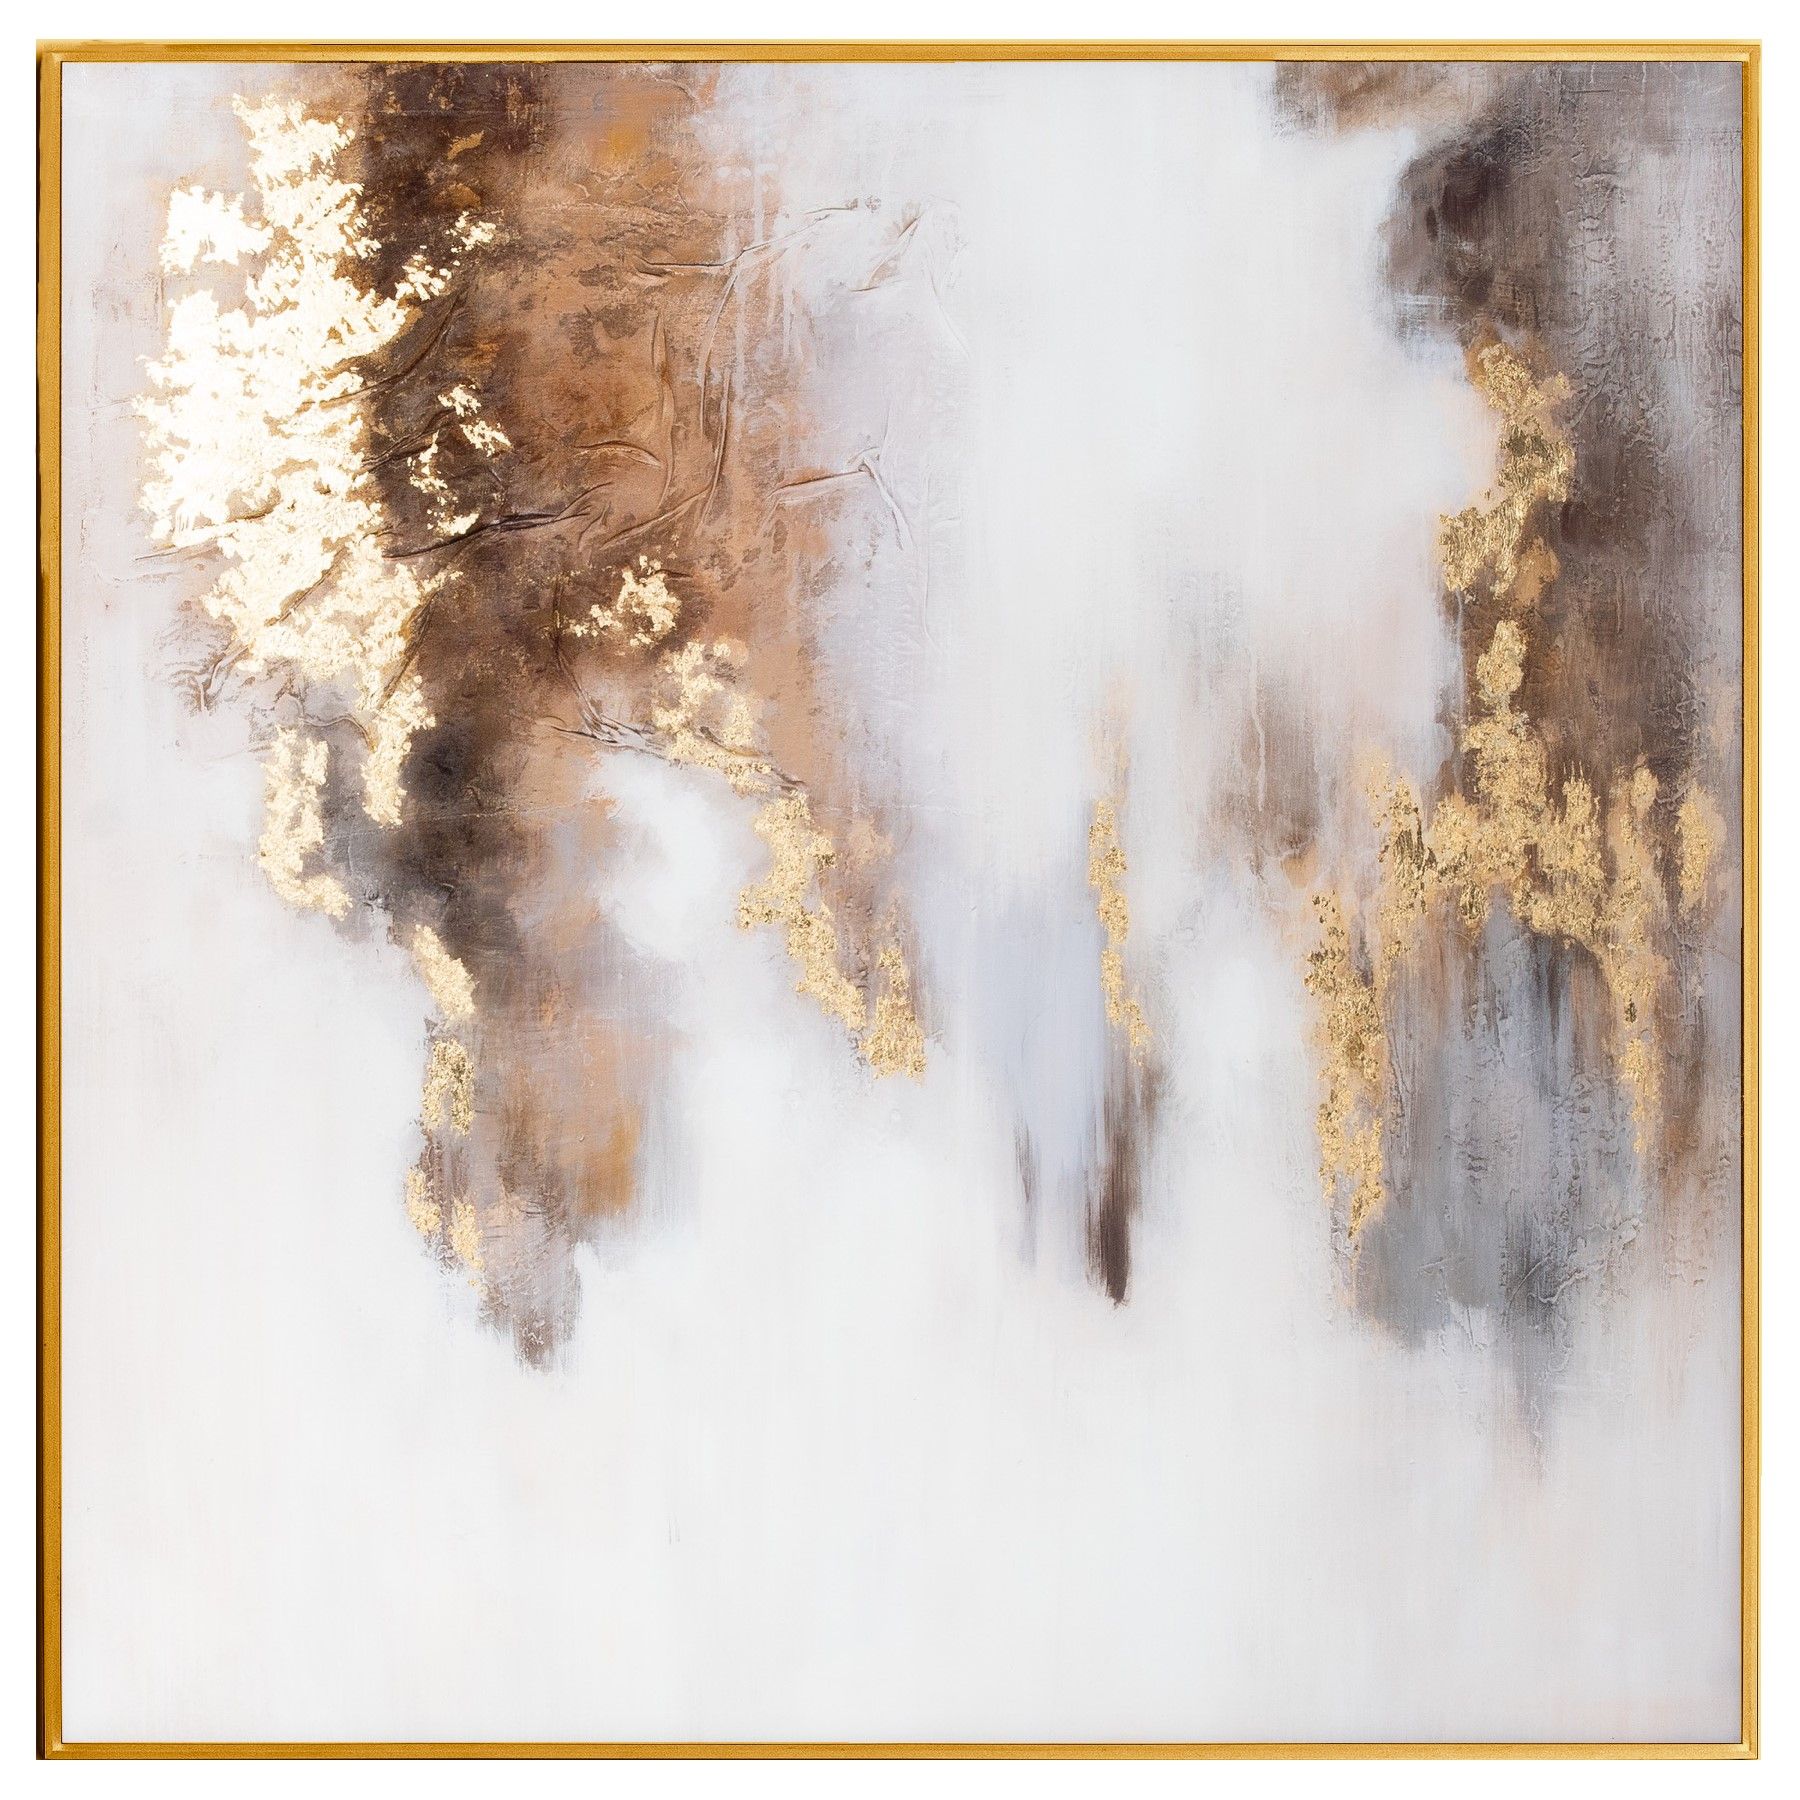 Metallic Soft Abstract Glass Image In Gold Frame - Image 1